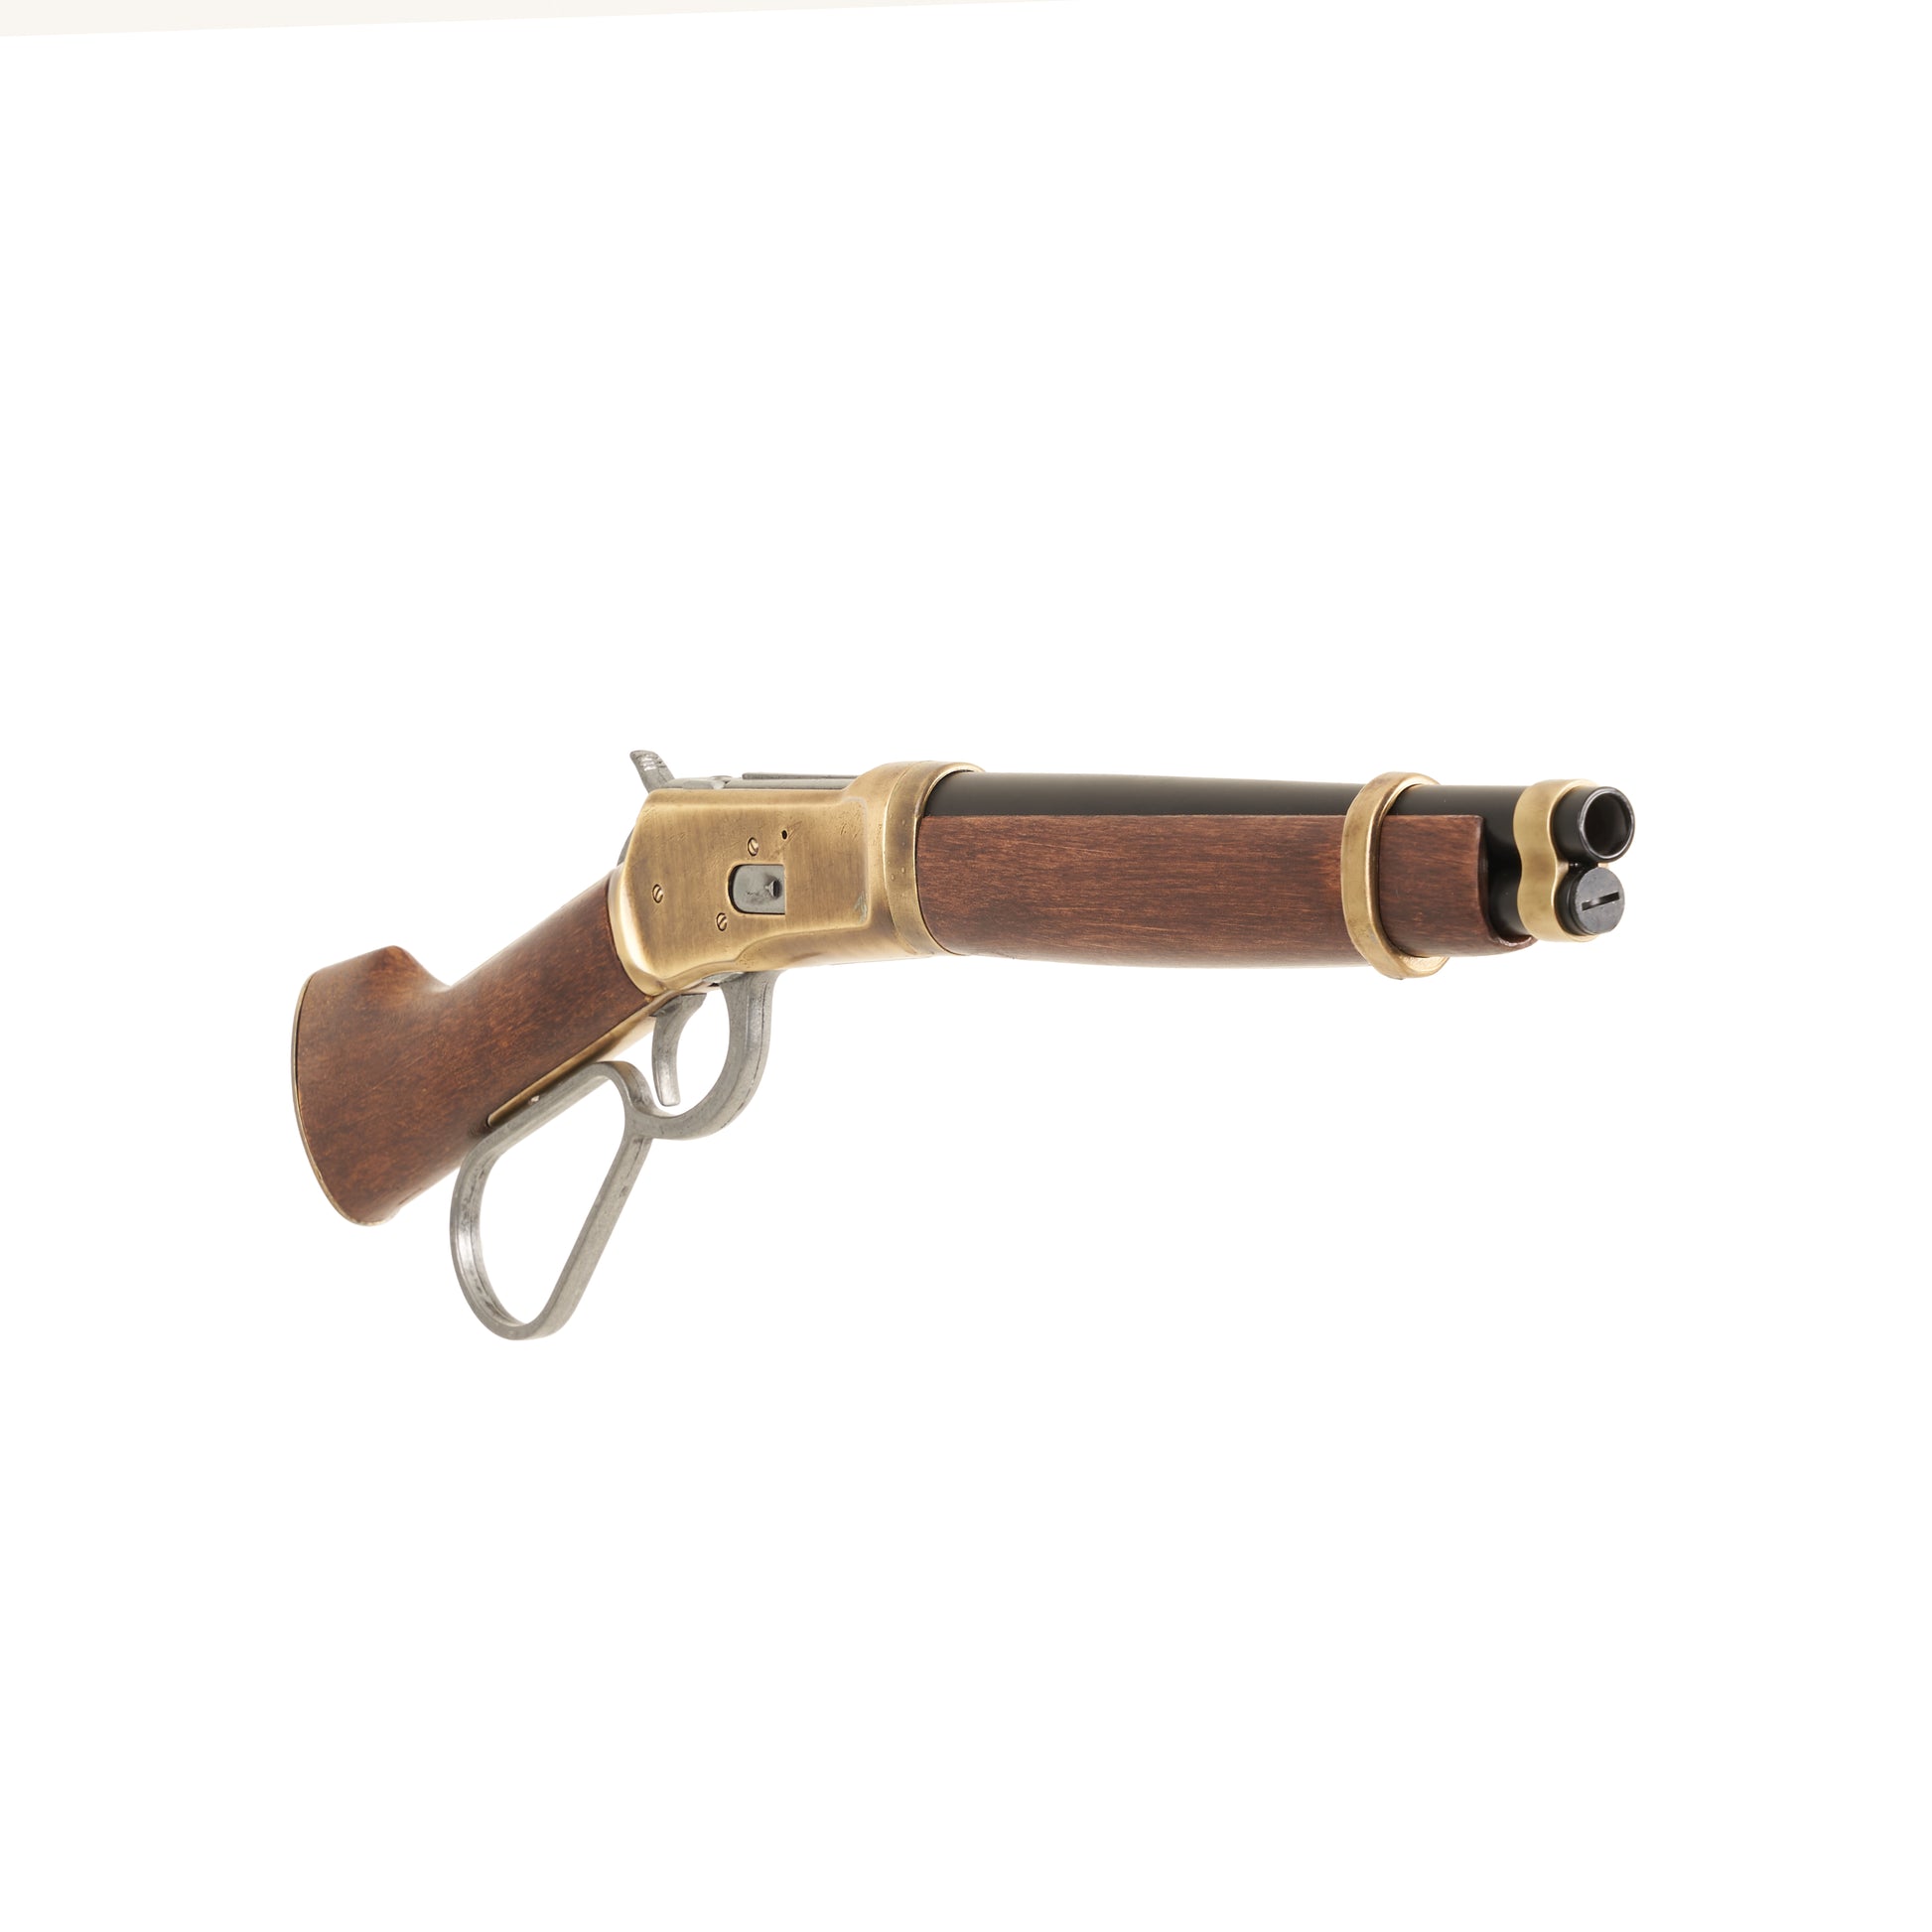 Front view of Mare's Leg Rifle with gray loop lever handle, brass mechanism and trim, wood stock, and black barrel.